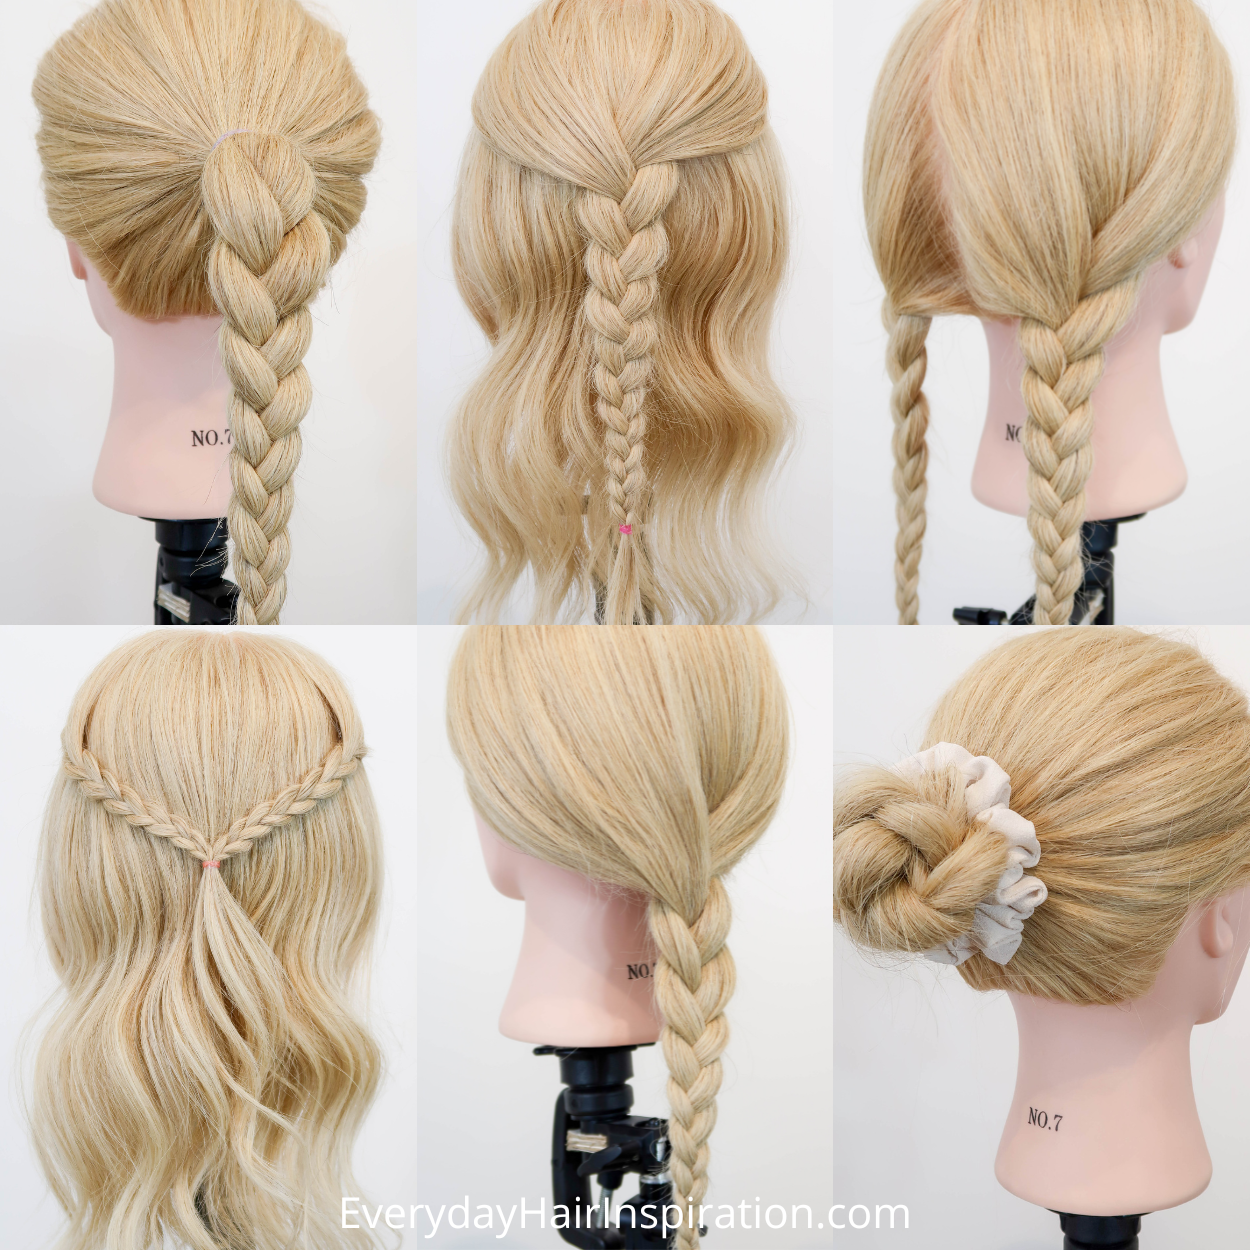 Double donut high bun hairstyle step by step. | doughnut, hairstyle, bun |  Double donut high bun hairstyle step by step. | By Shakun Hairdo | Facebook